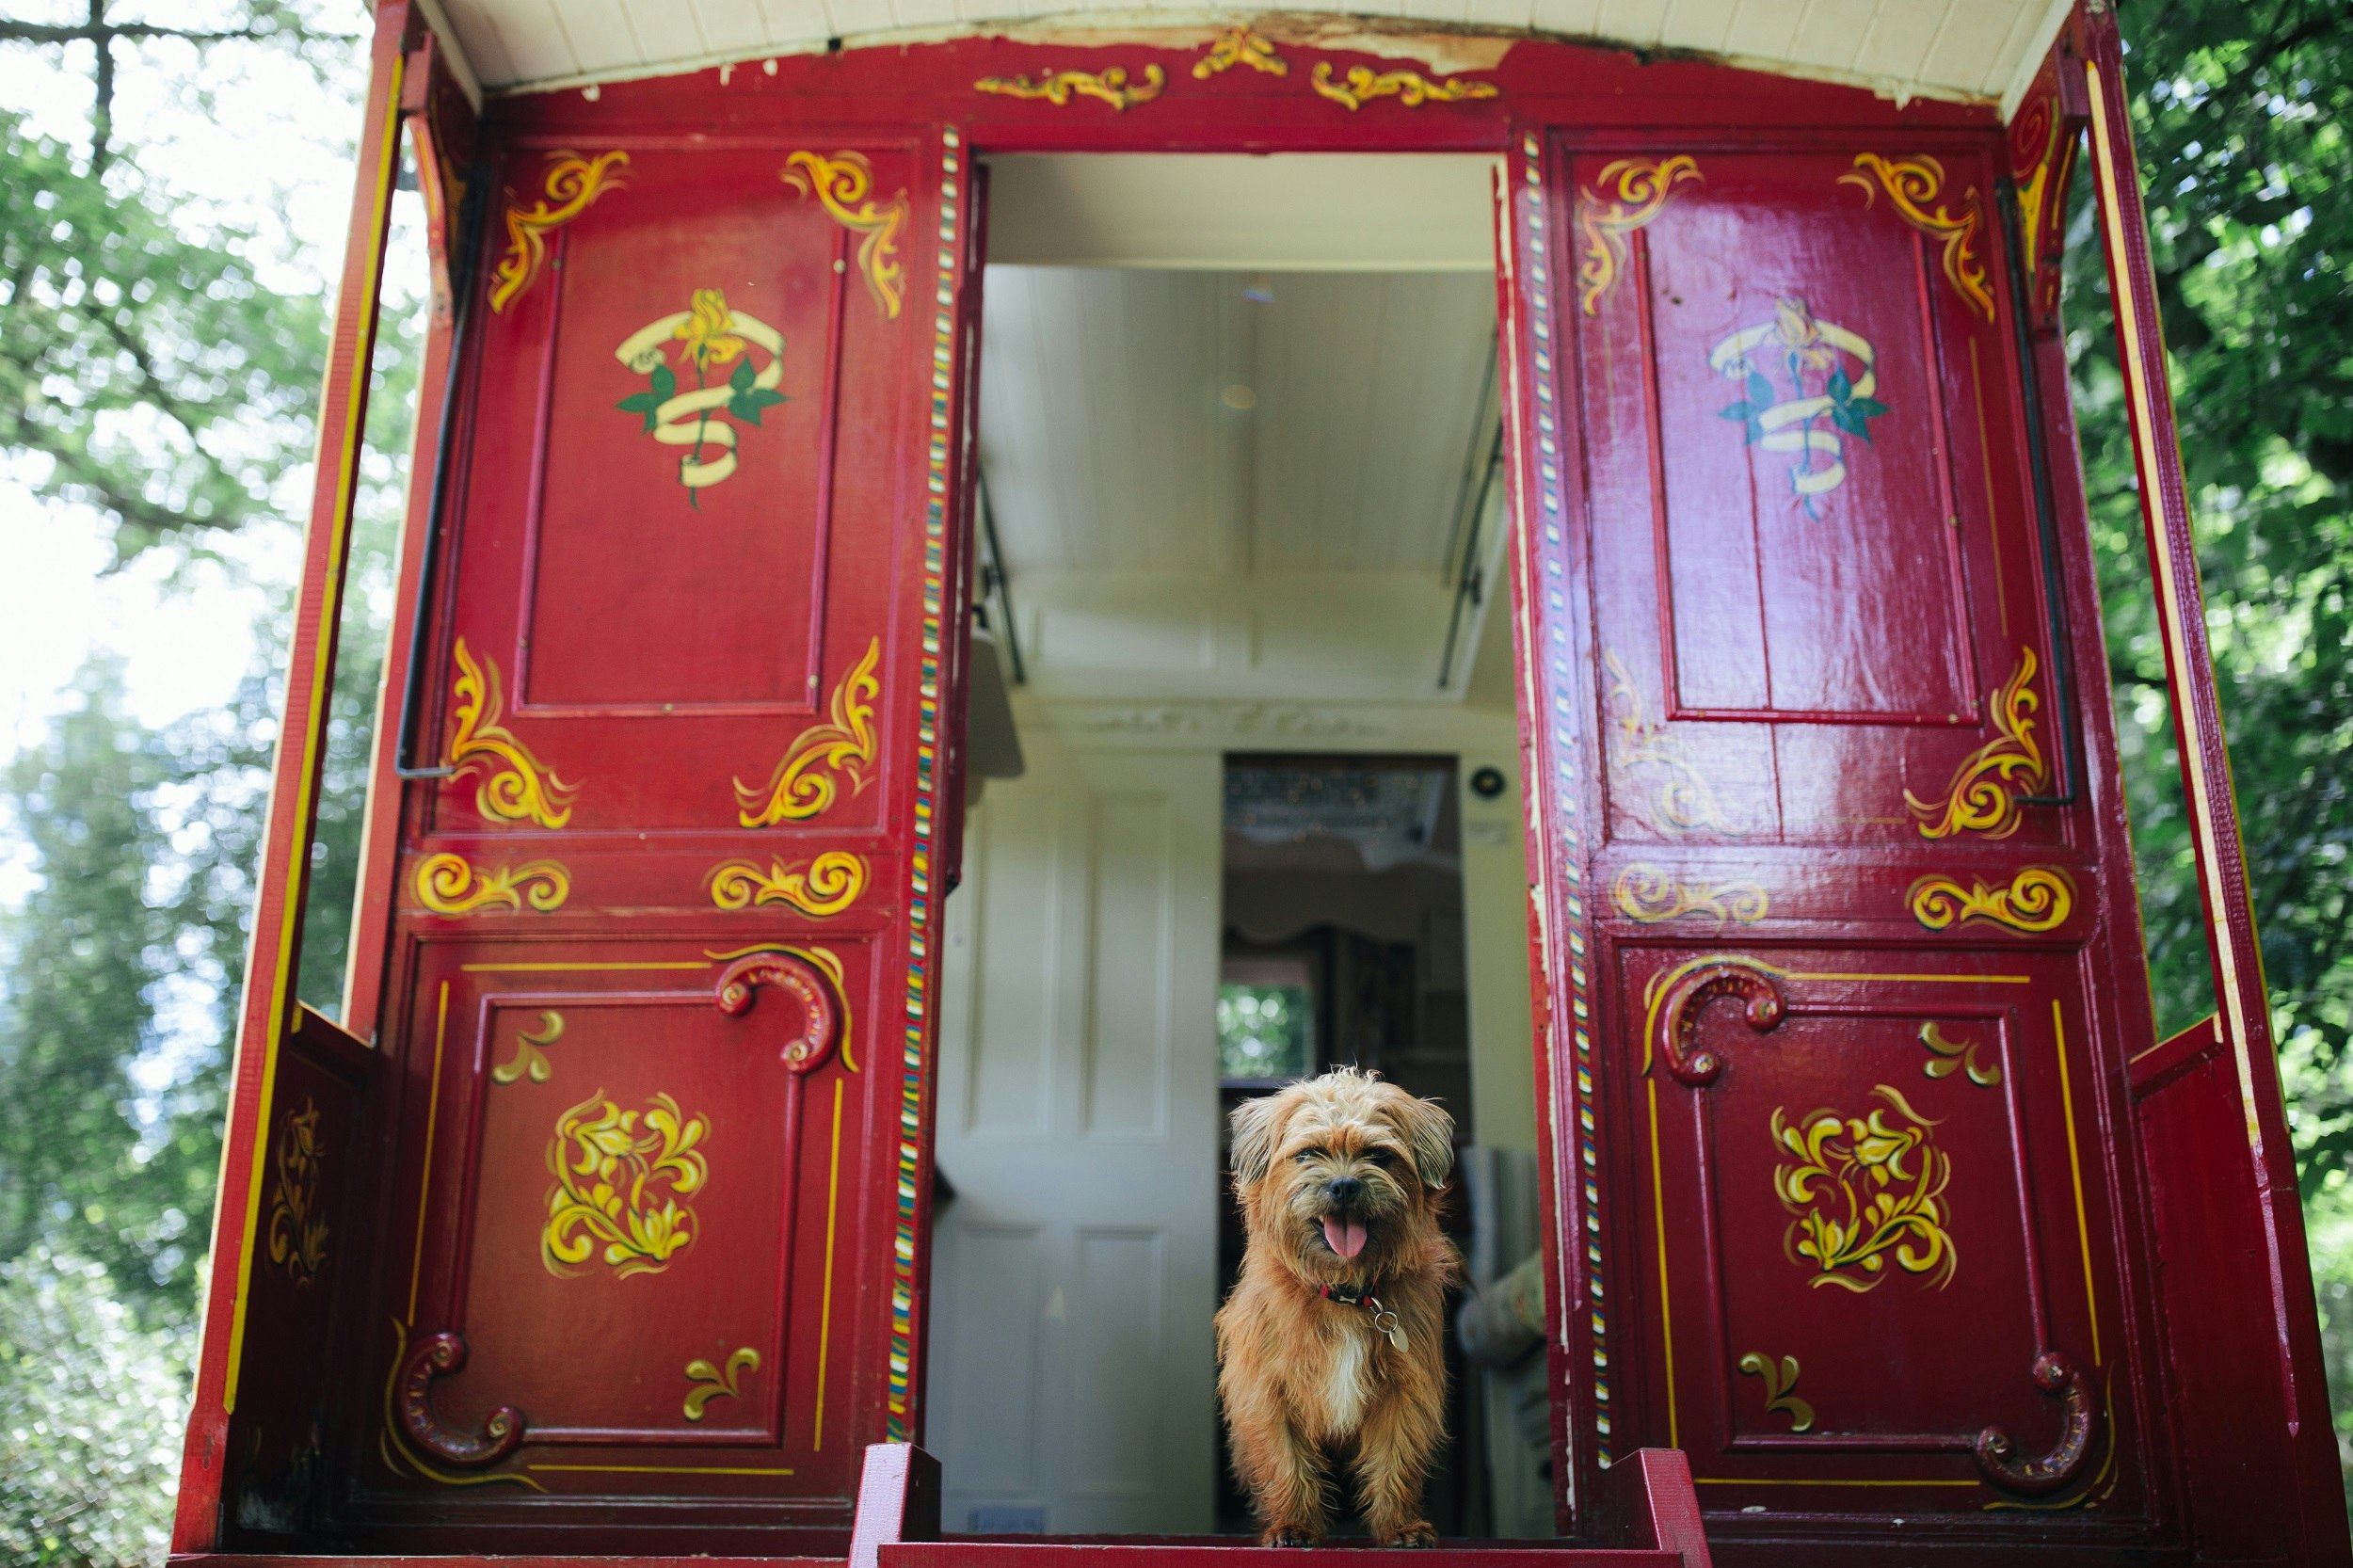 A small terrier stands on the steps of an old-fashioned red caravan with ornate decorations on the wooden doors